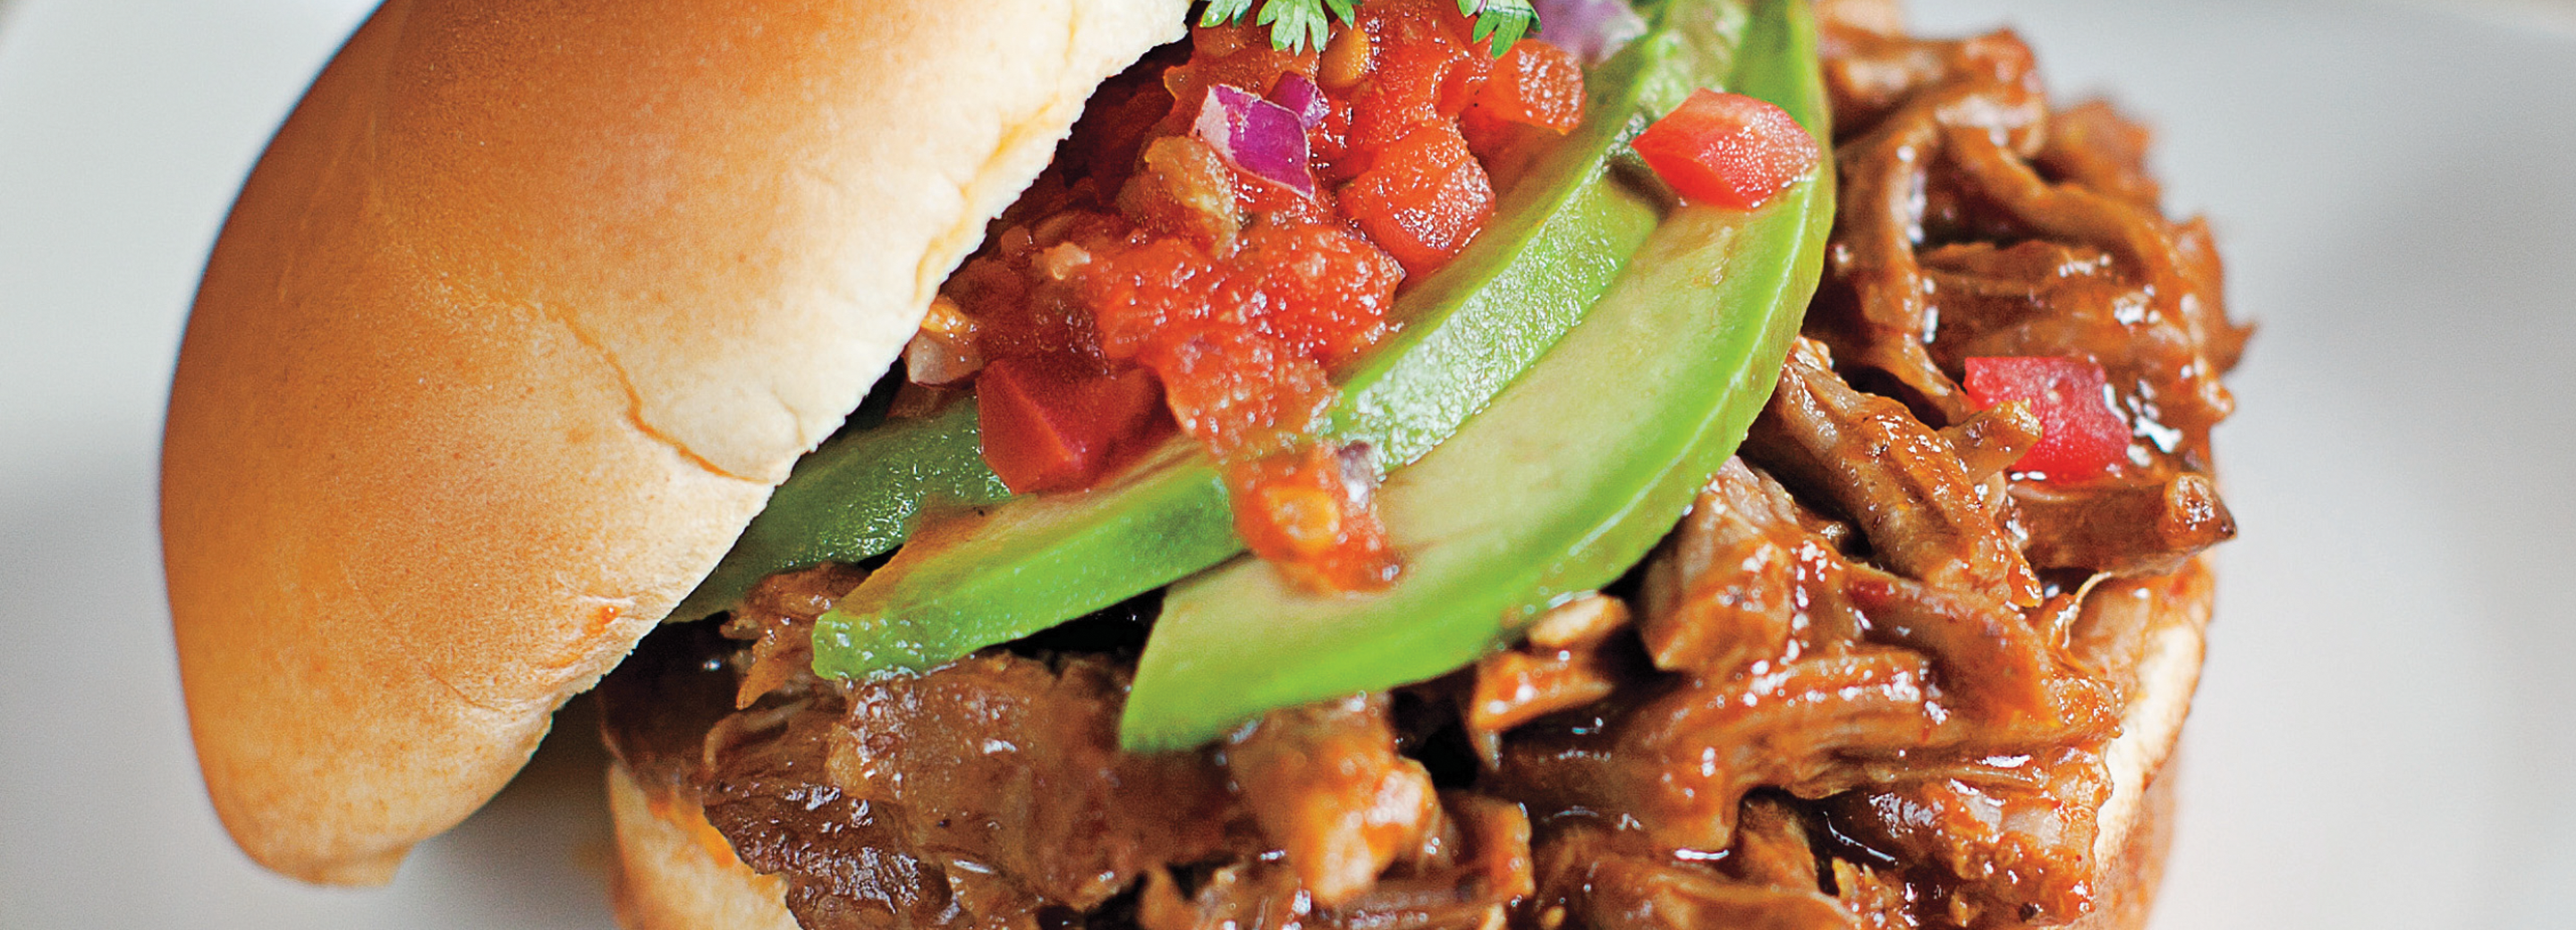 Spicy Chipotle Pulled Pork Sandwiches